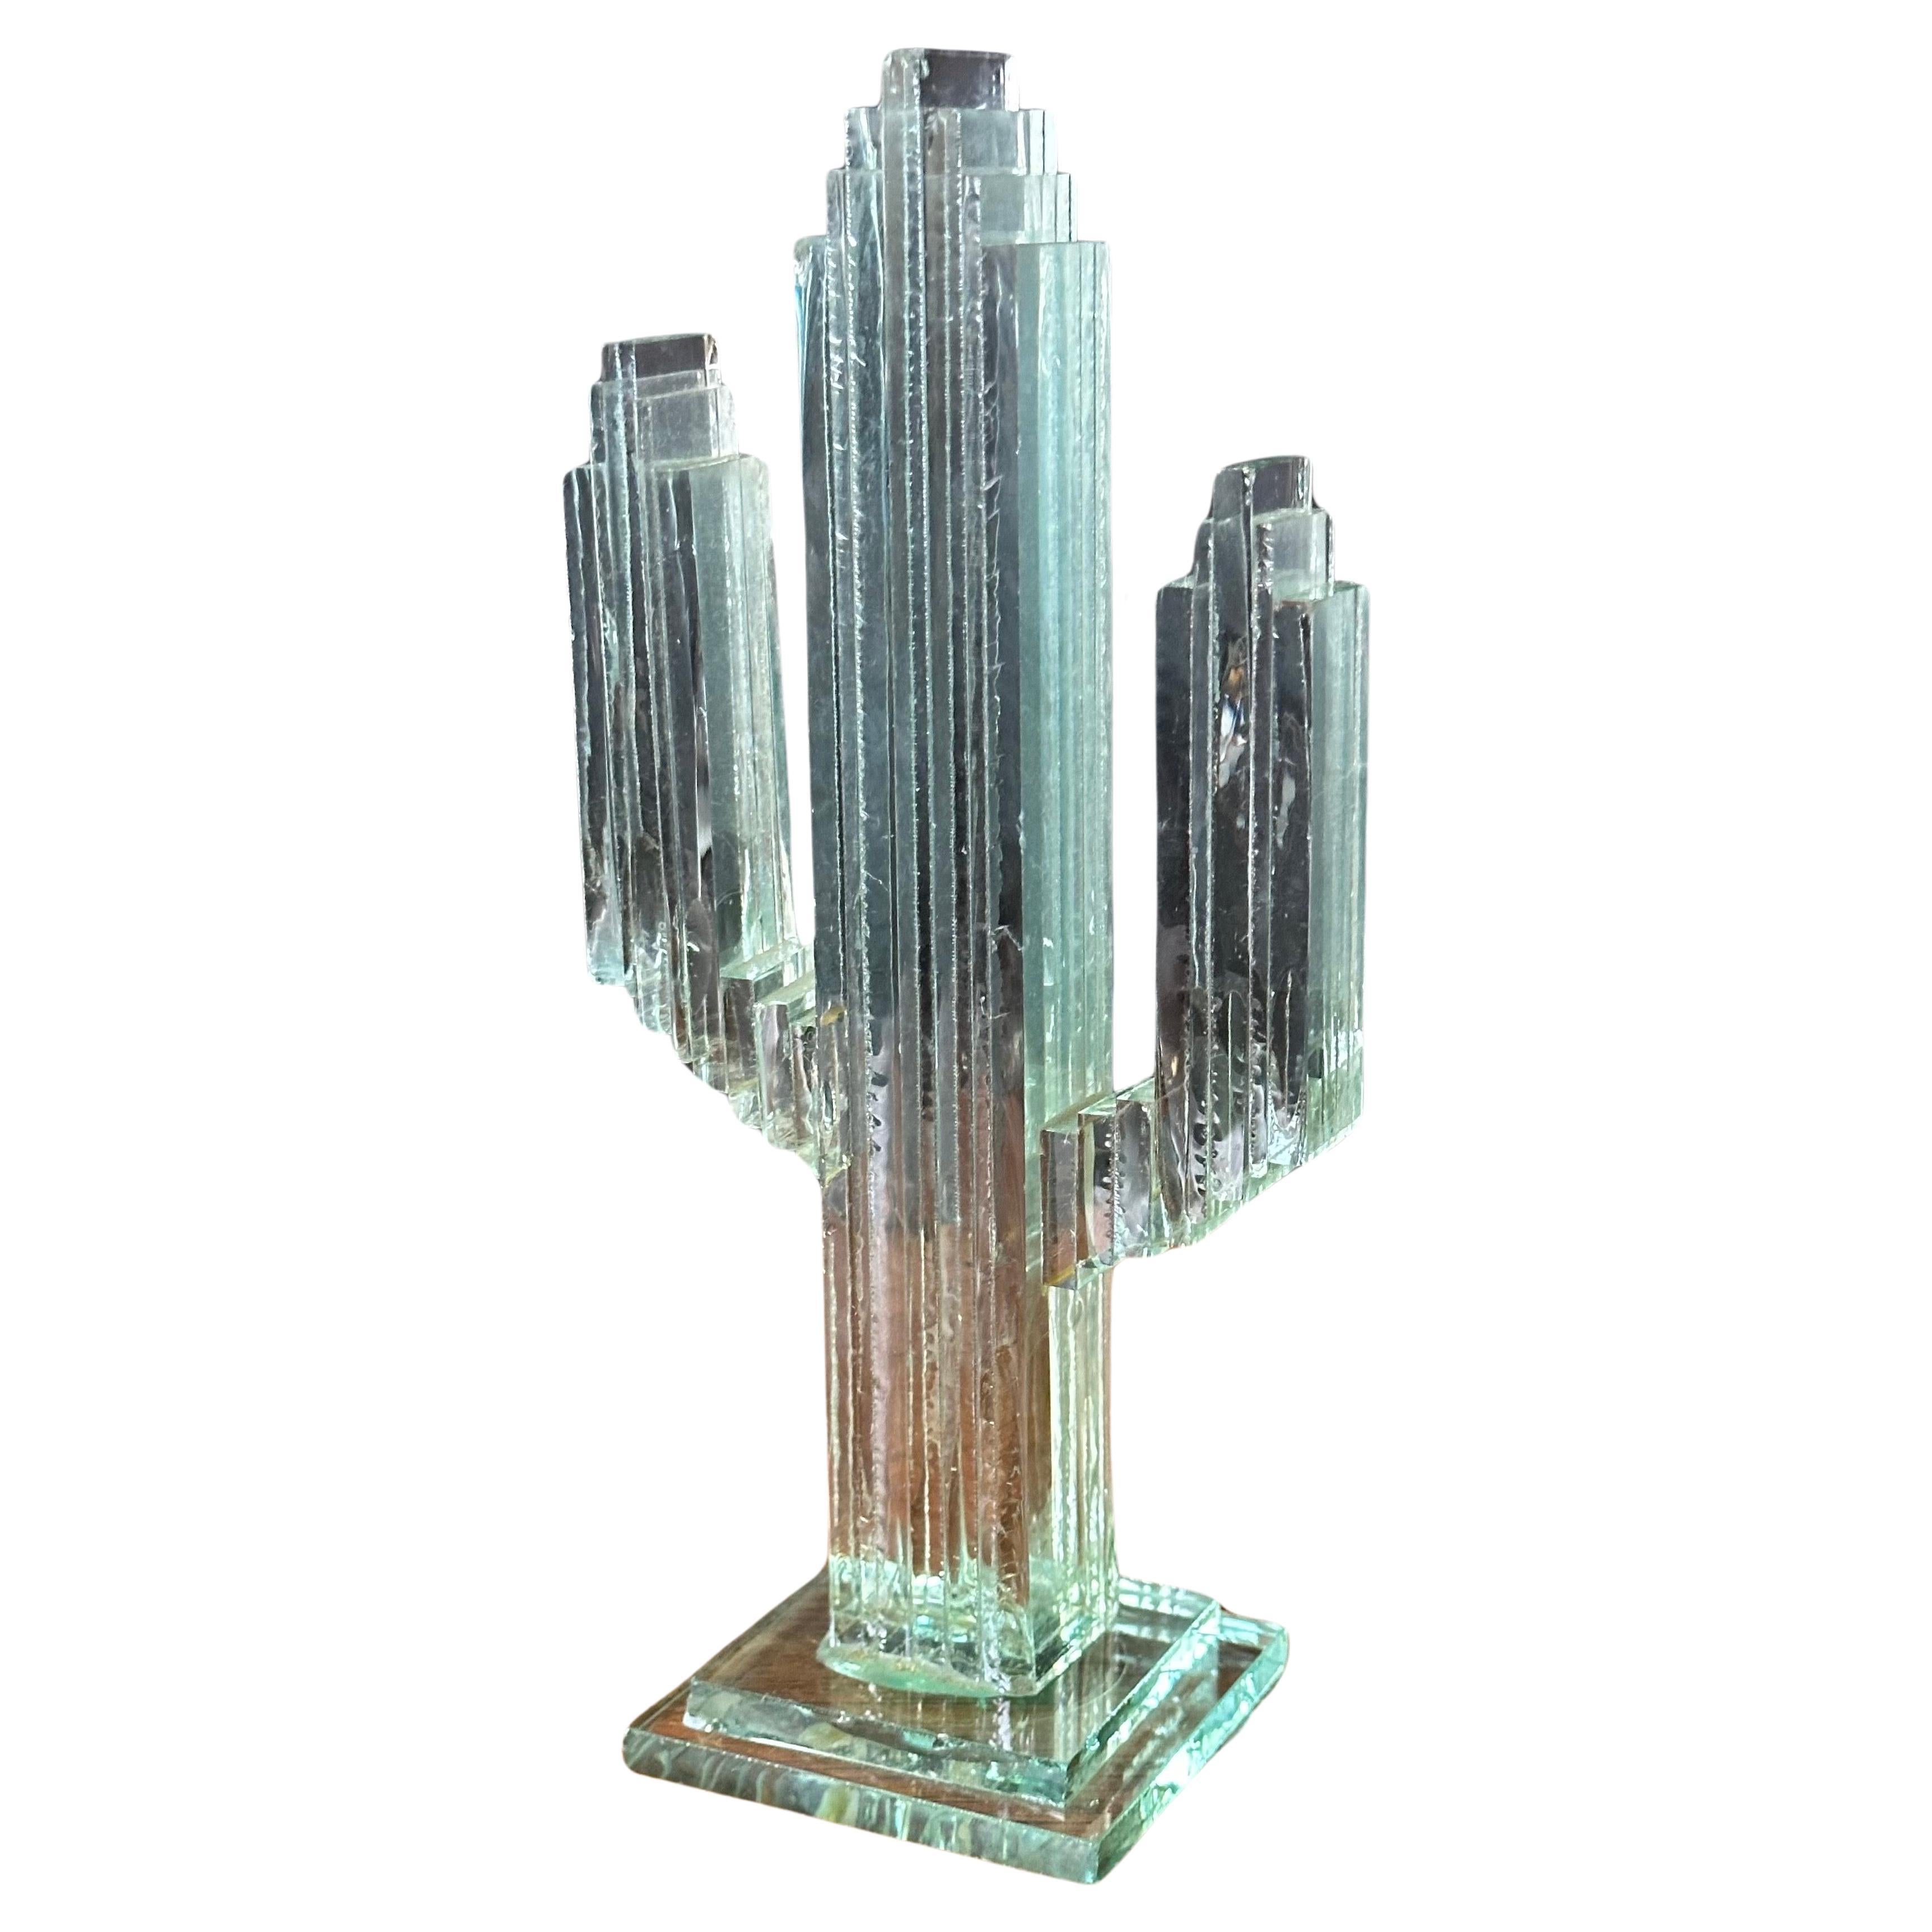 Organic Modern Stacked Glass Panel Saguaro Cactus Sculpture  For Sale